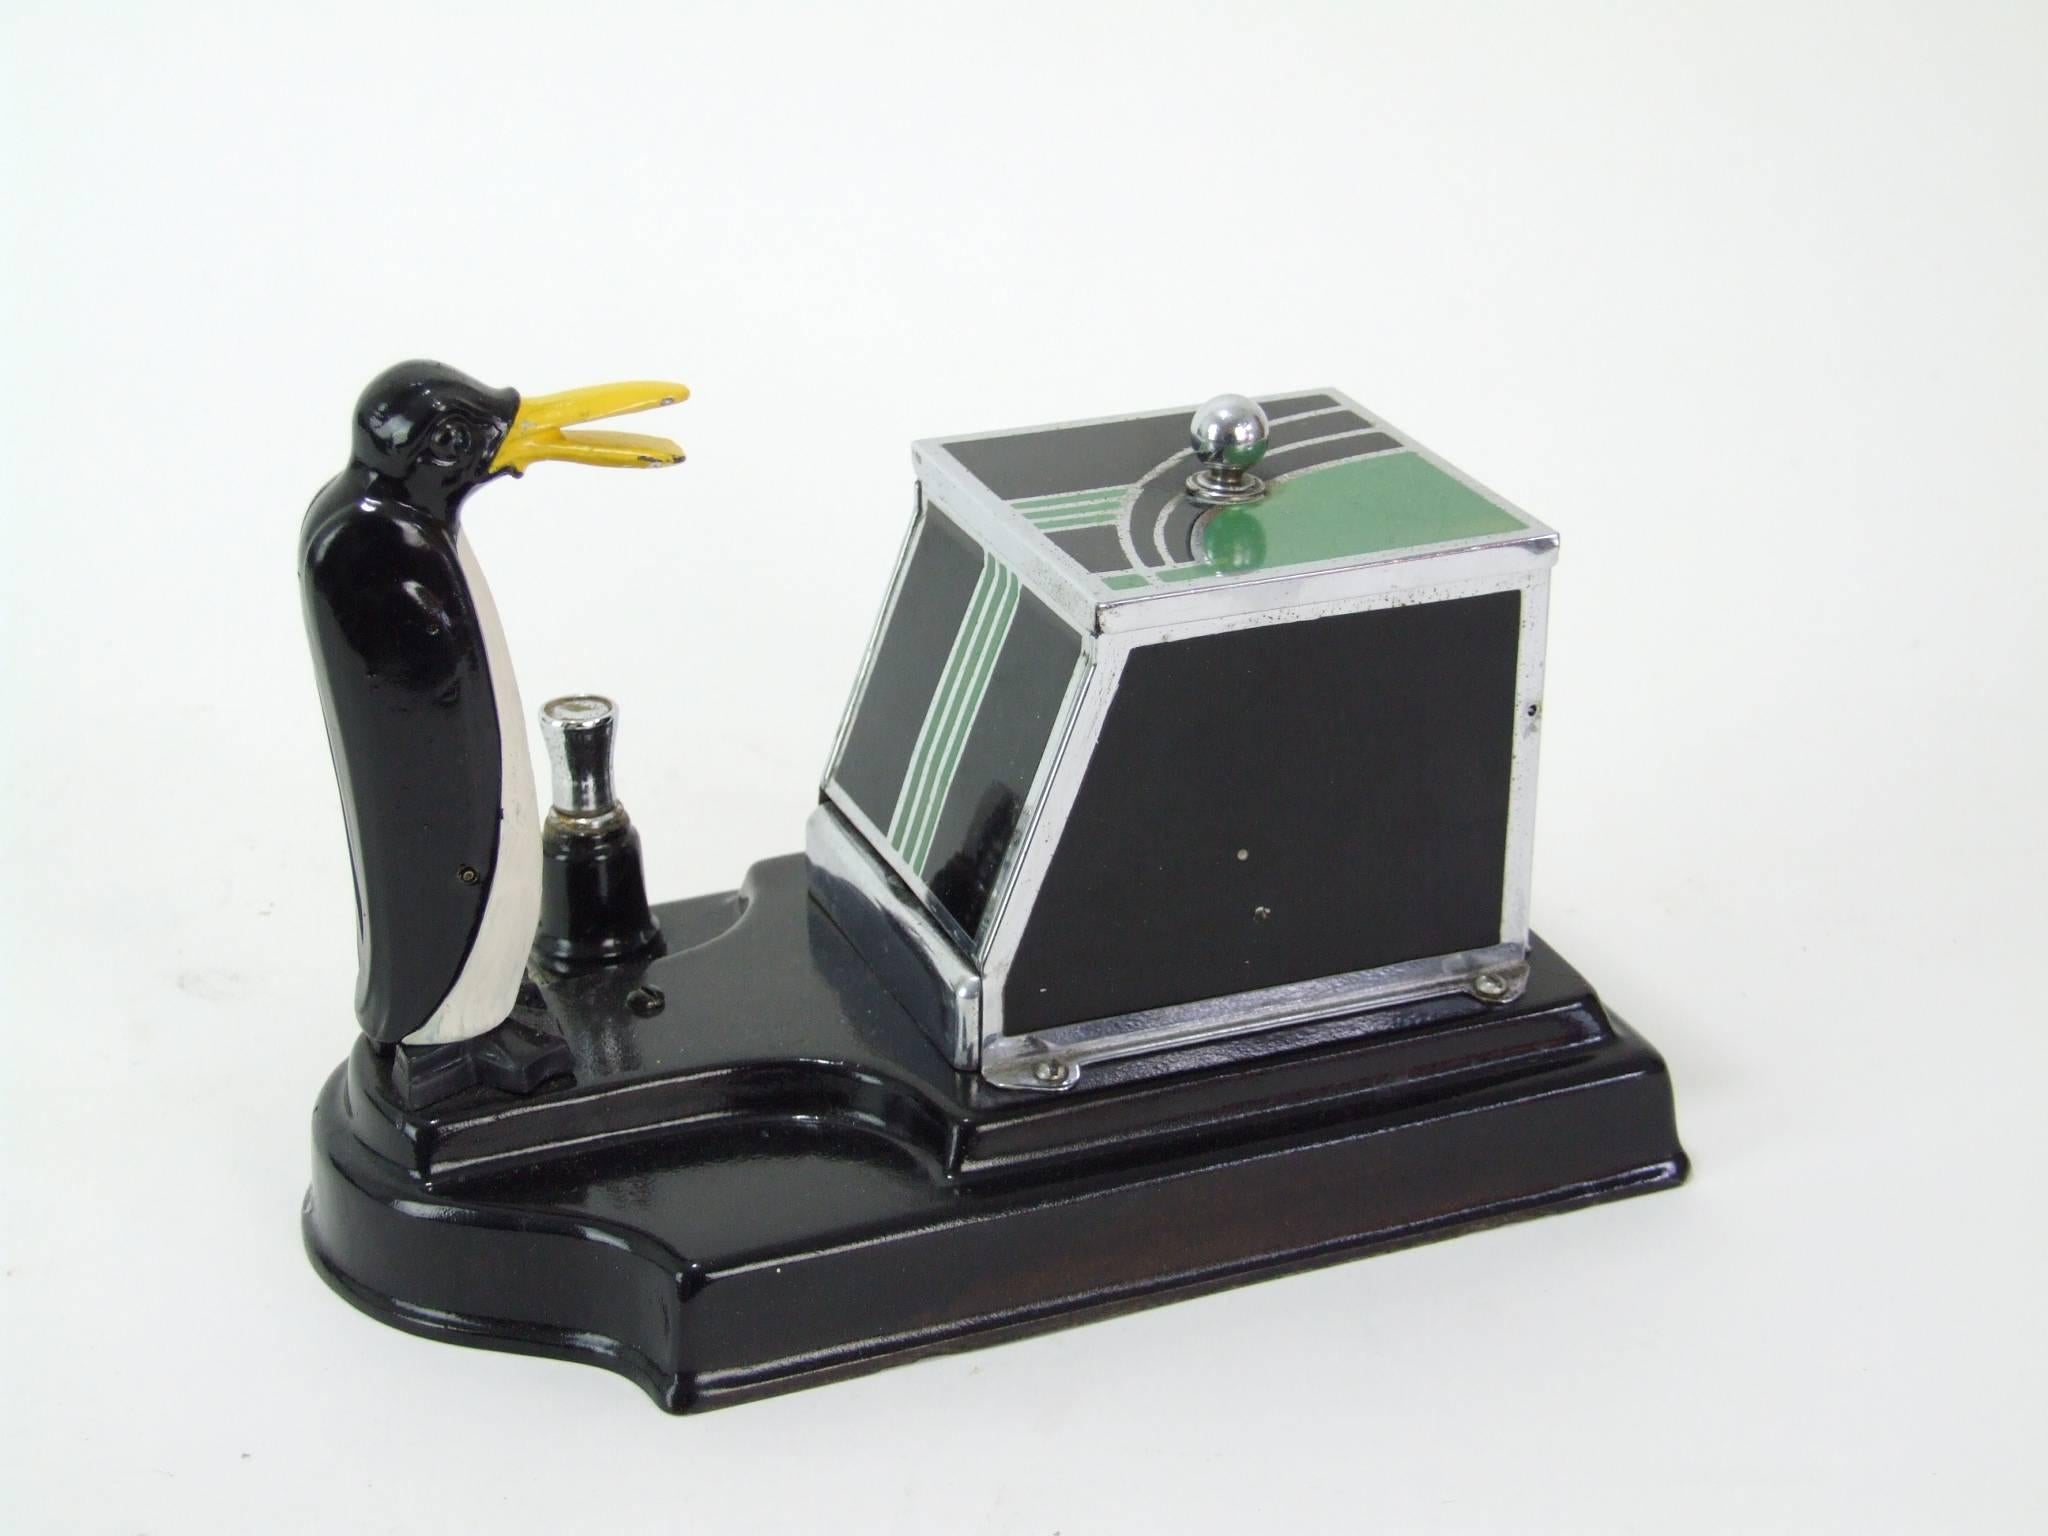 North American Pick-a-Cig Penguin Smokers Box For Sale